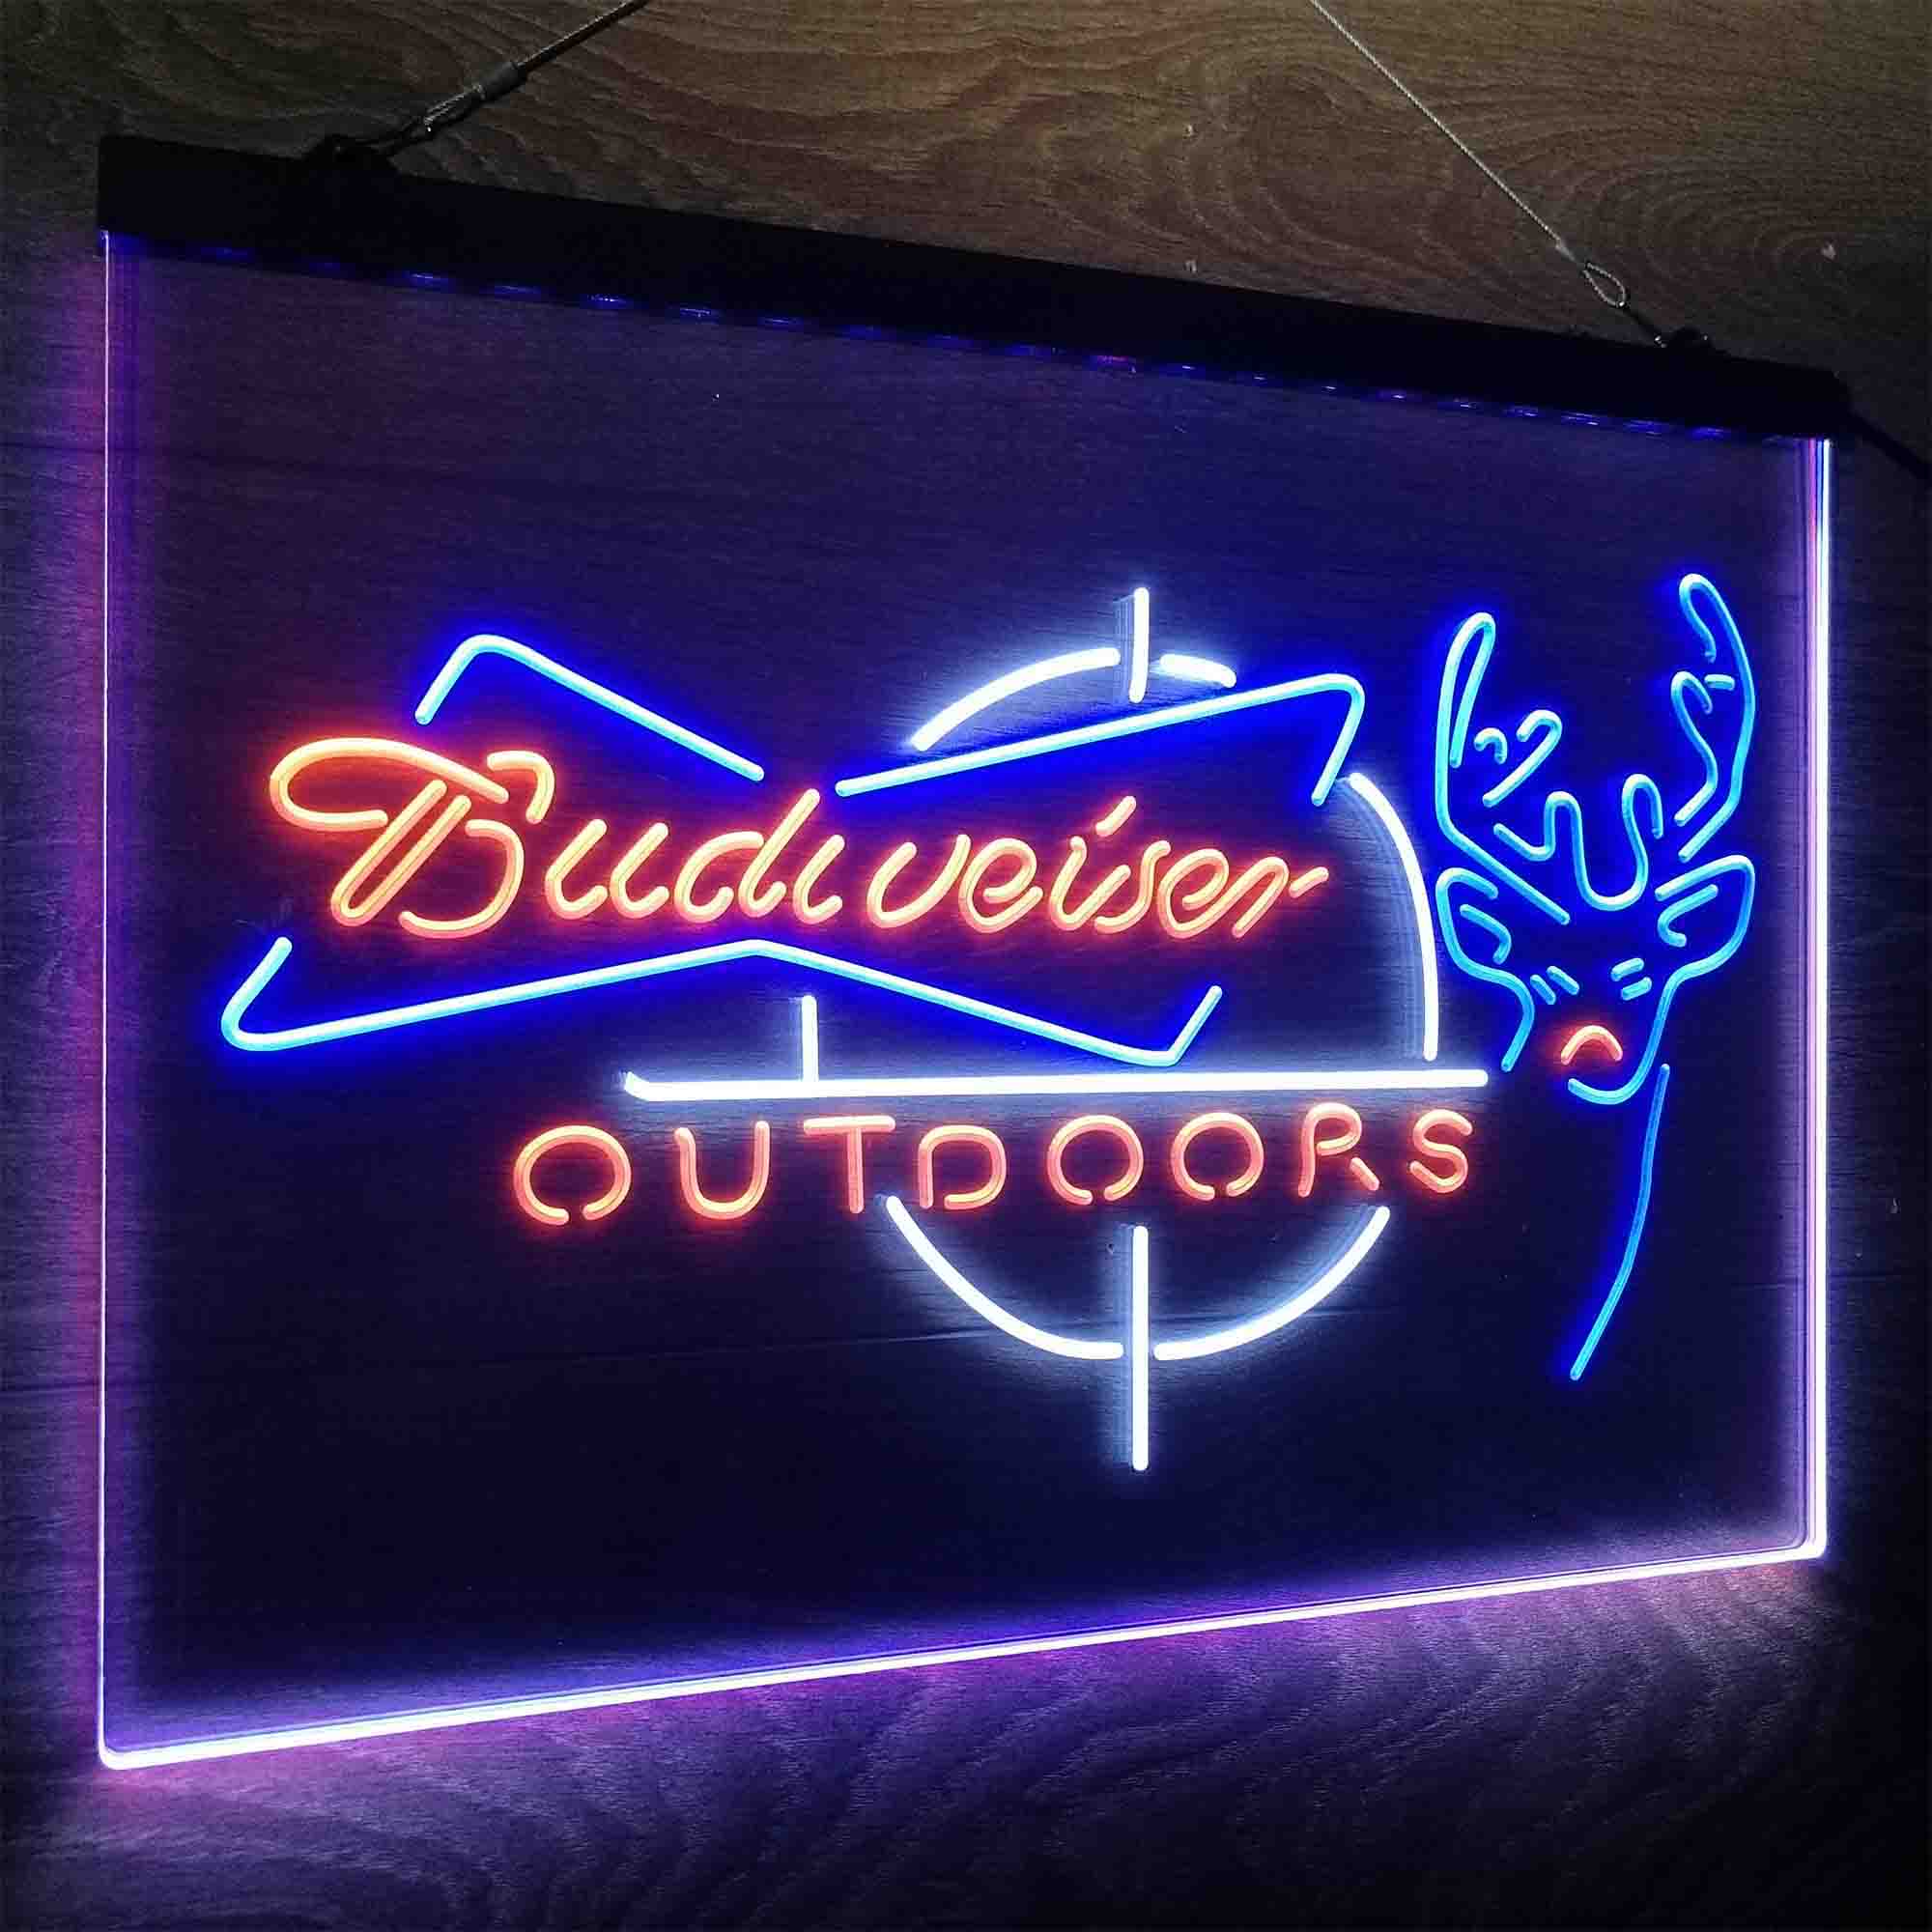 Budweiser Outdoor Hunting Cabin Deer Decor Neon LED Sign 3 Colors